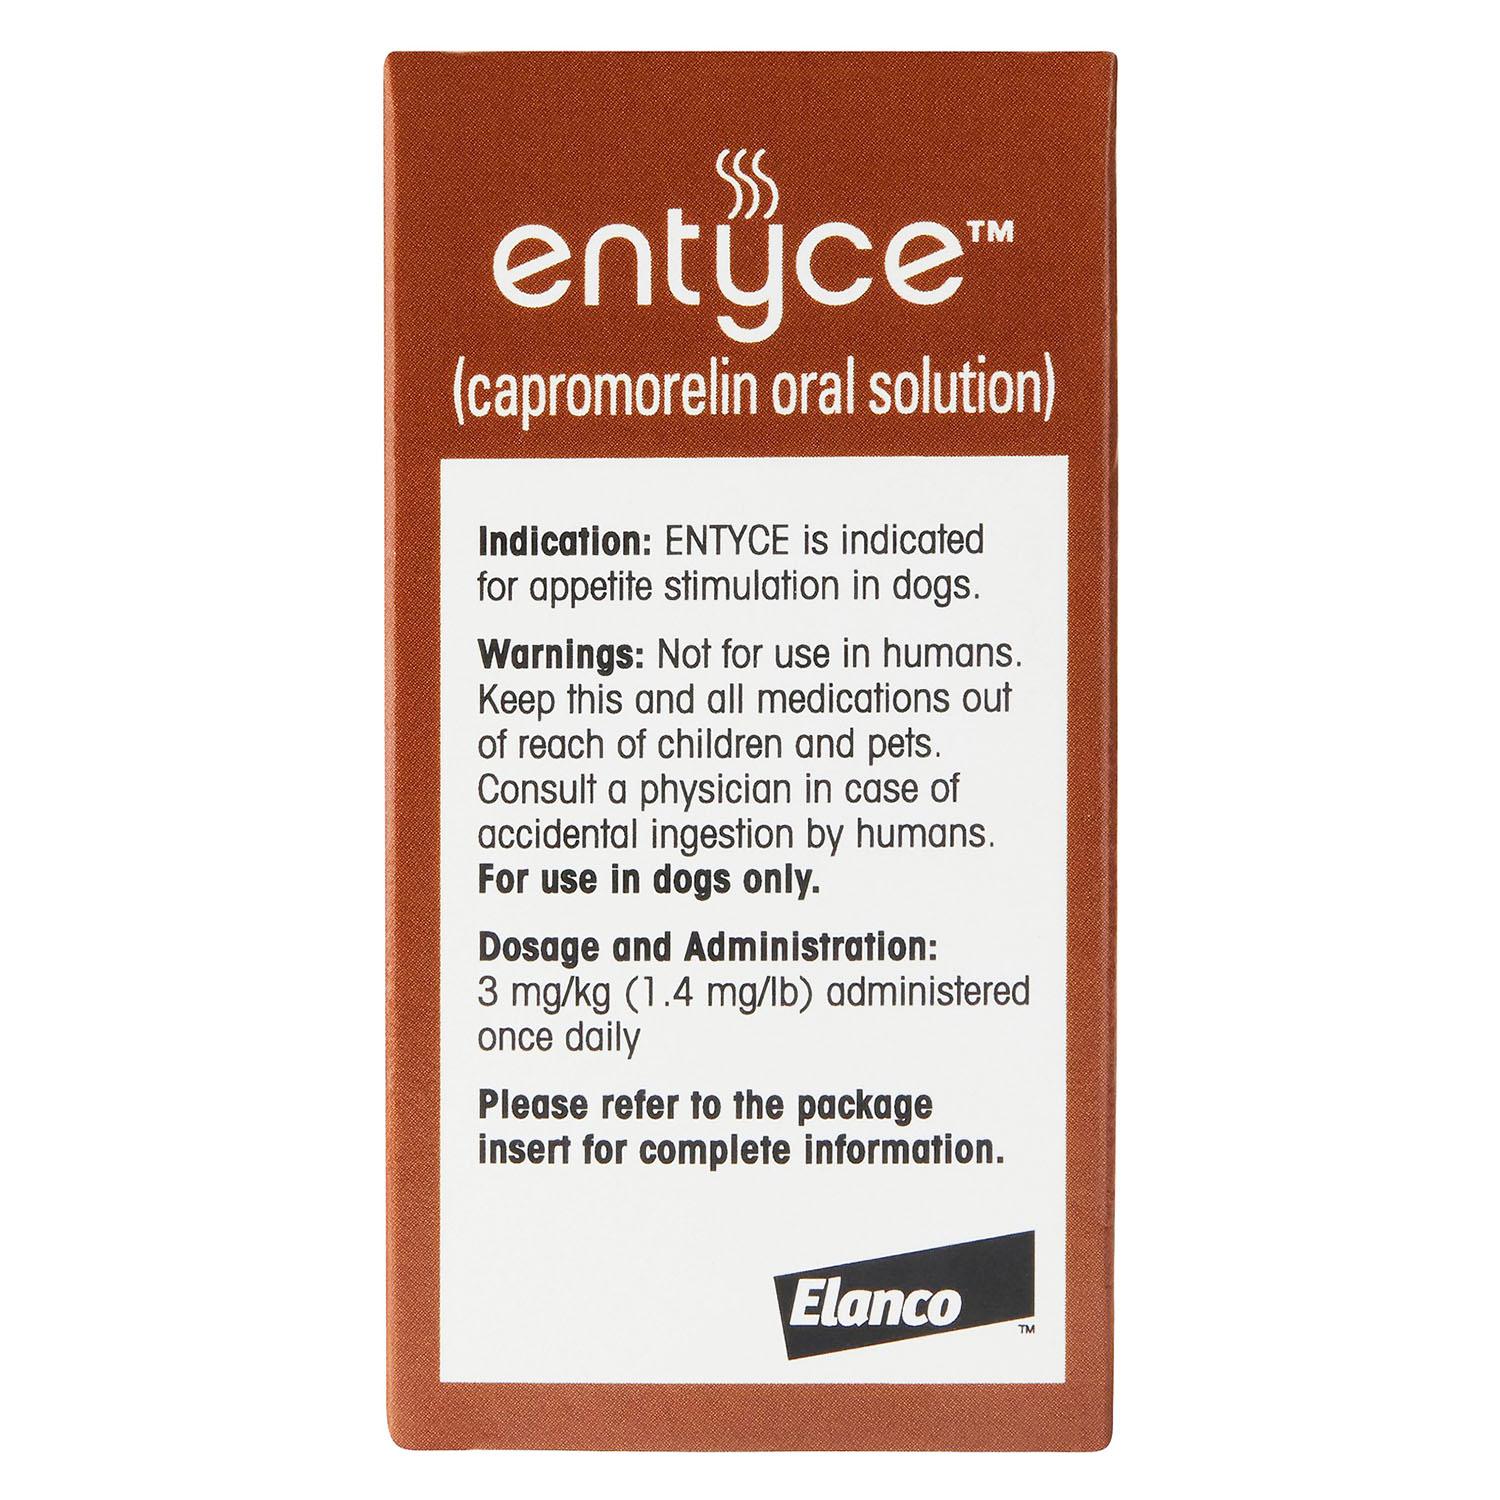 Entyce (capromorelin) Oral Solution 30mg/mL 30mL, With 7mL Dosing